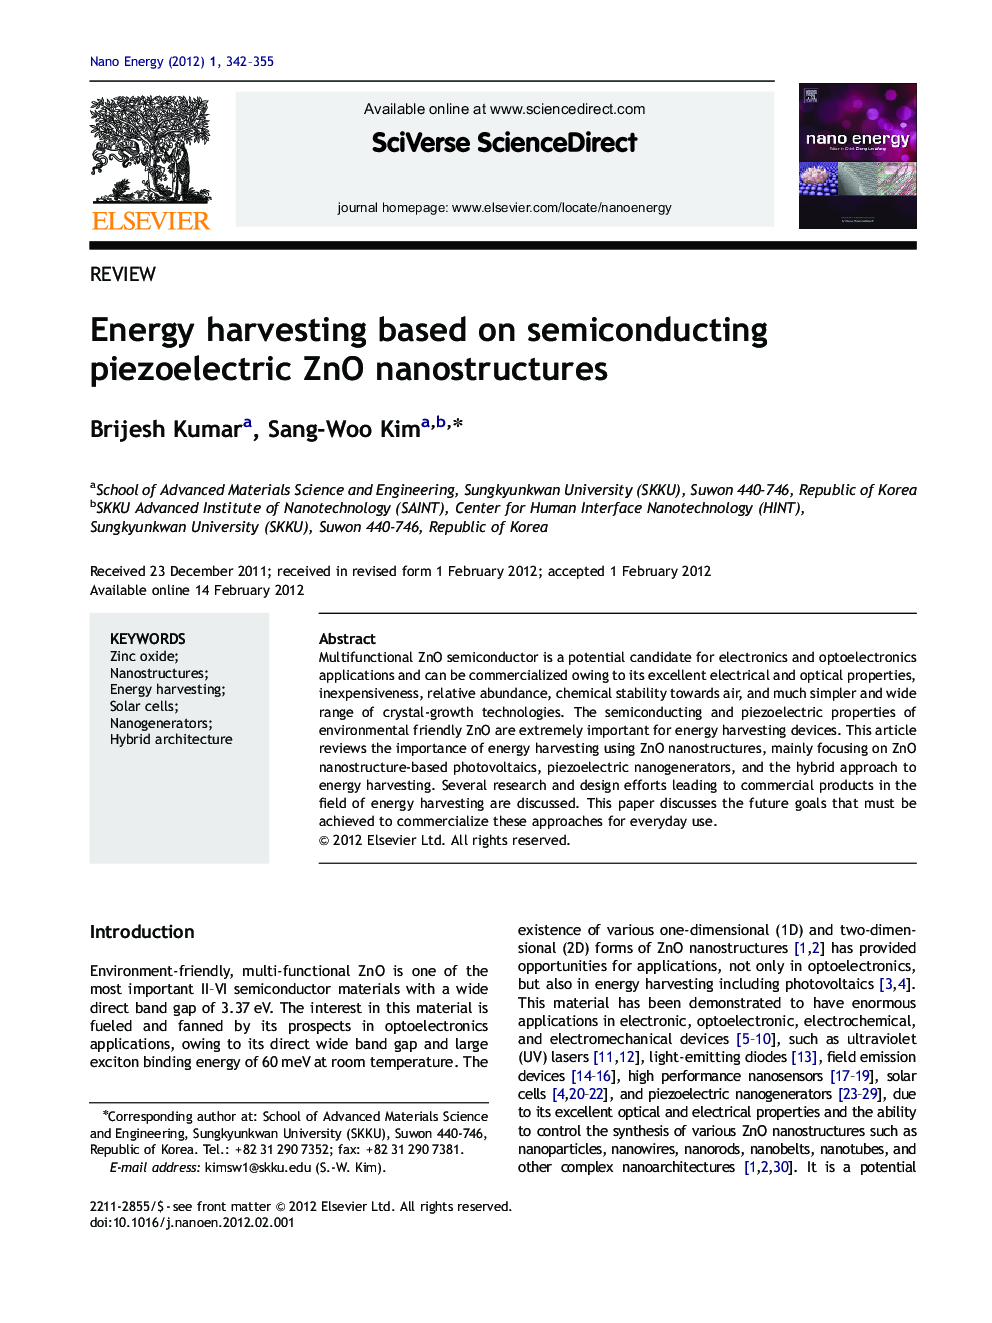 Energy harvesting based on semiconducting piezoelectric ZnO nanostructures